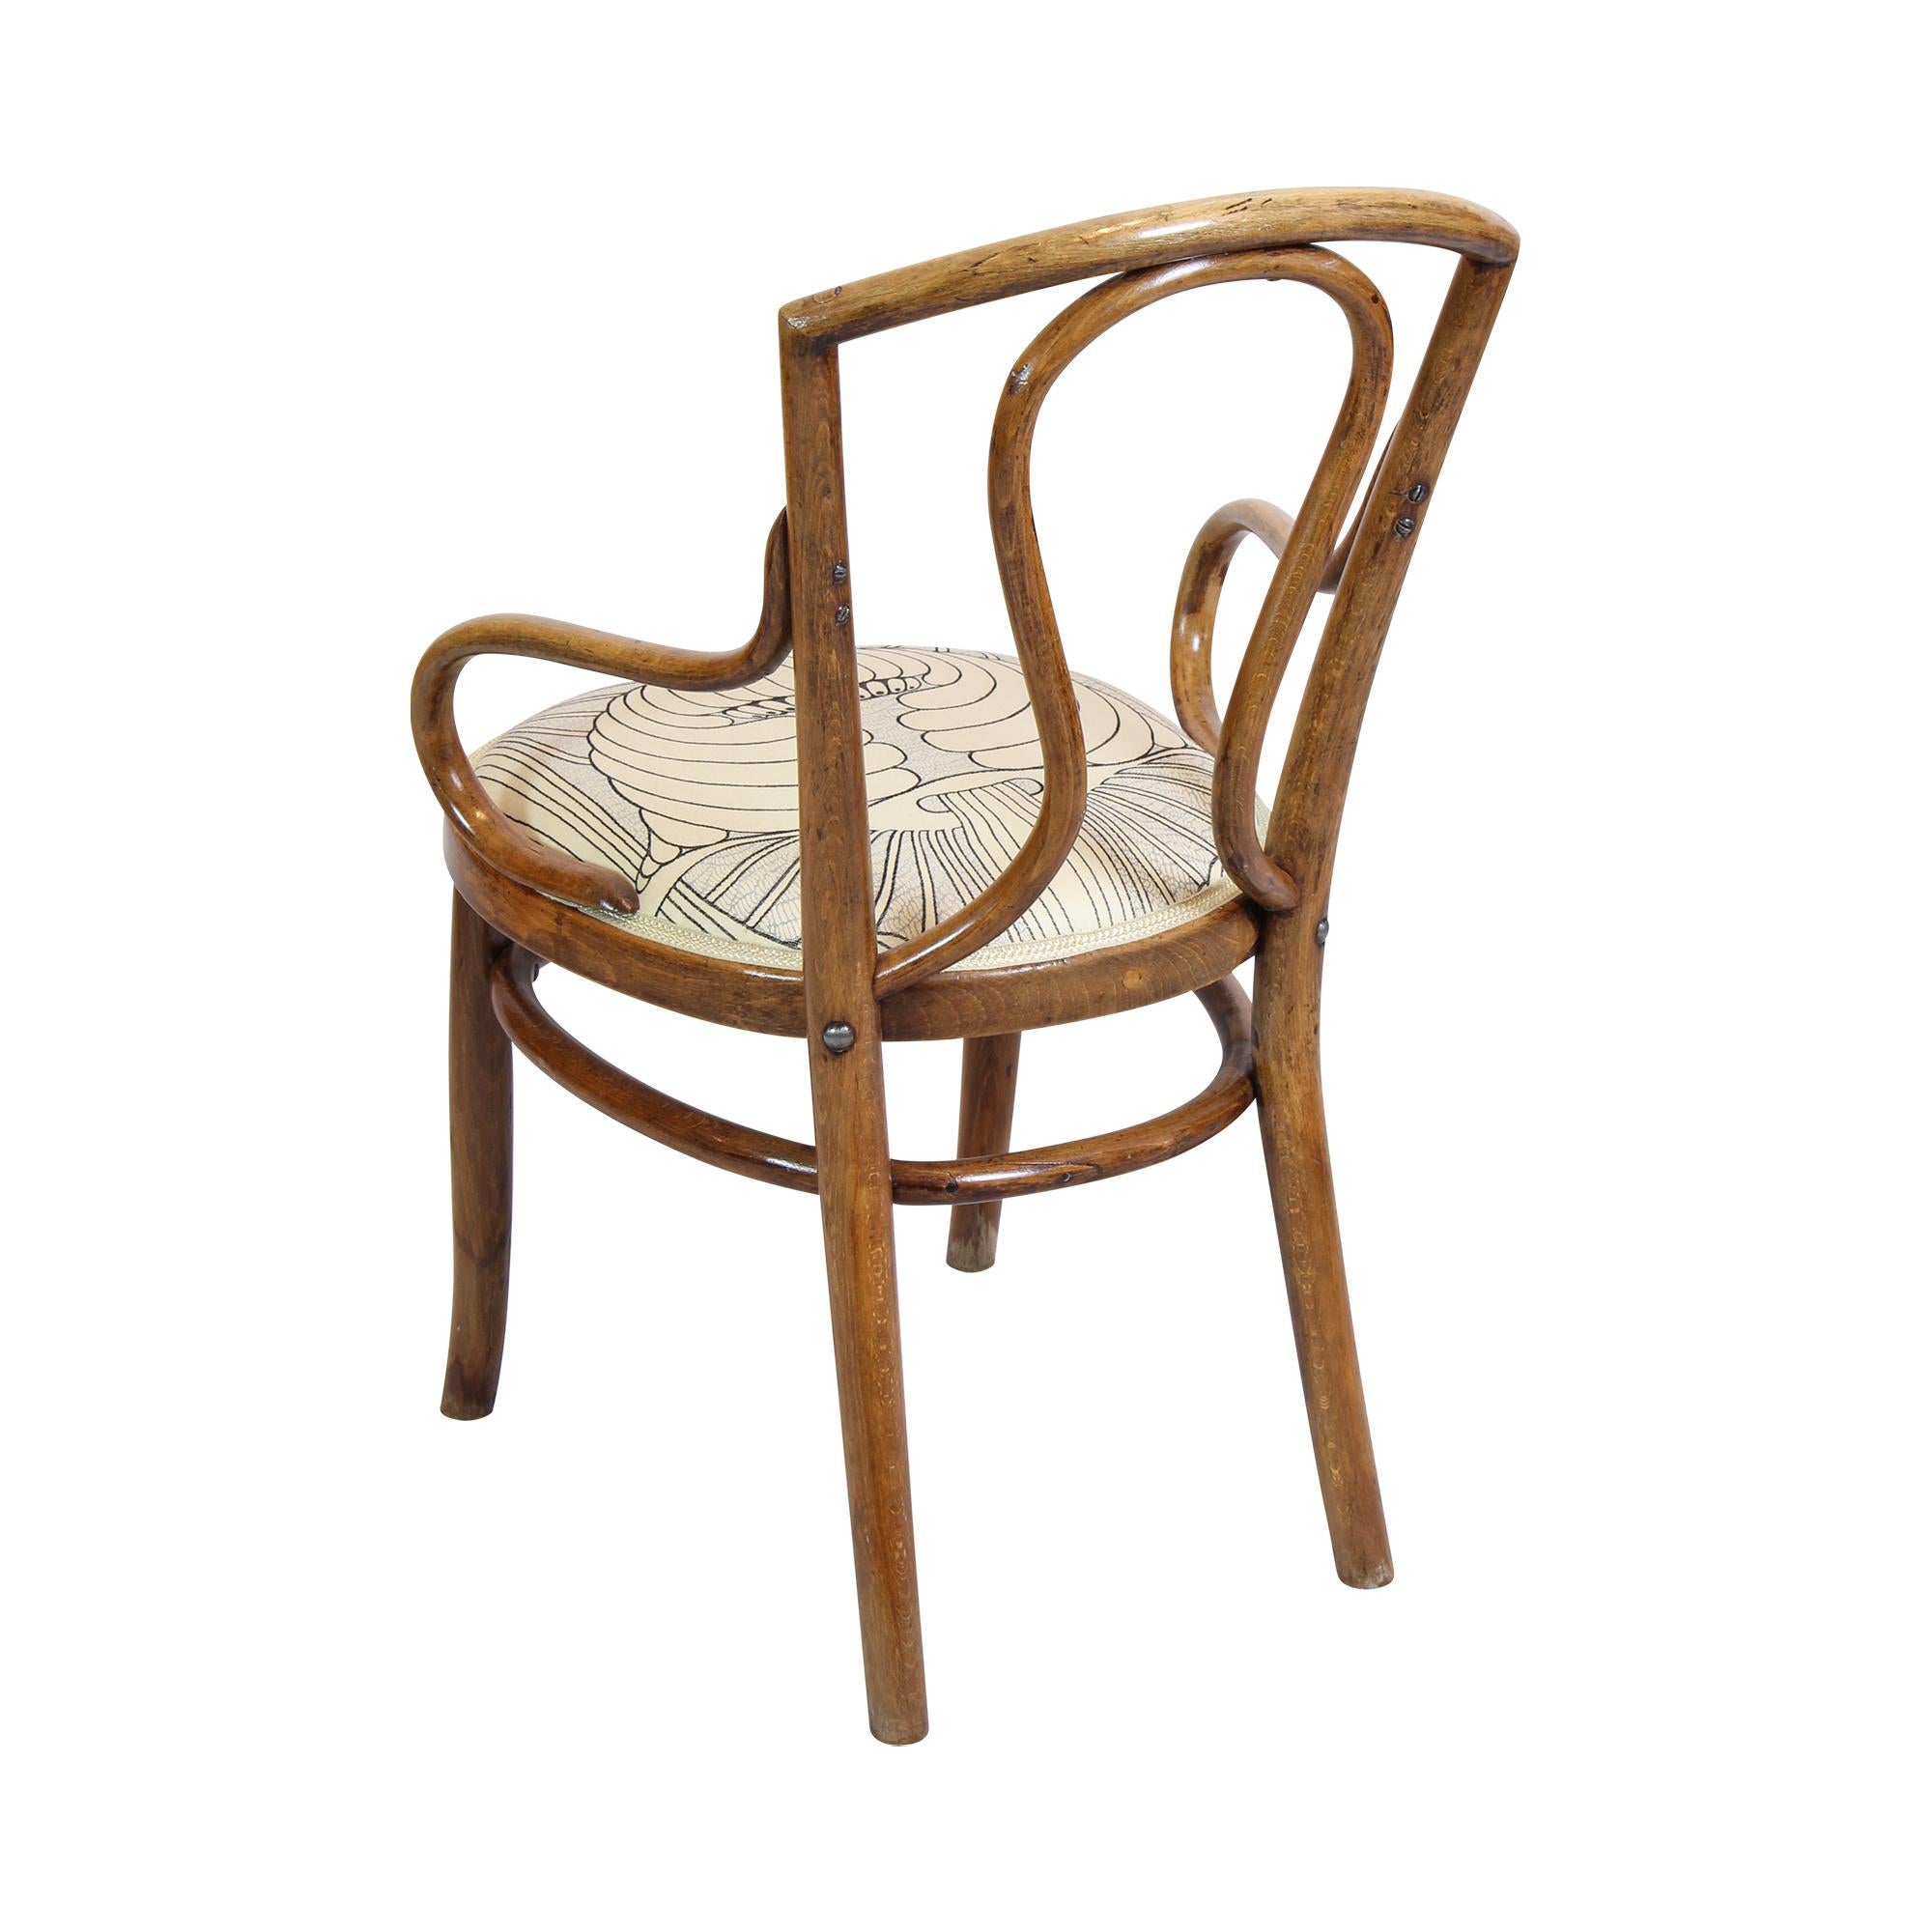 Polished Art Nouveau Around 1900 Bentwood Armchair For Sale